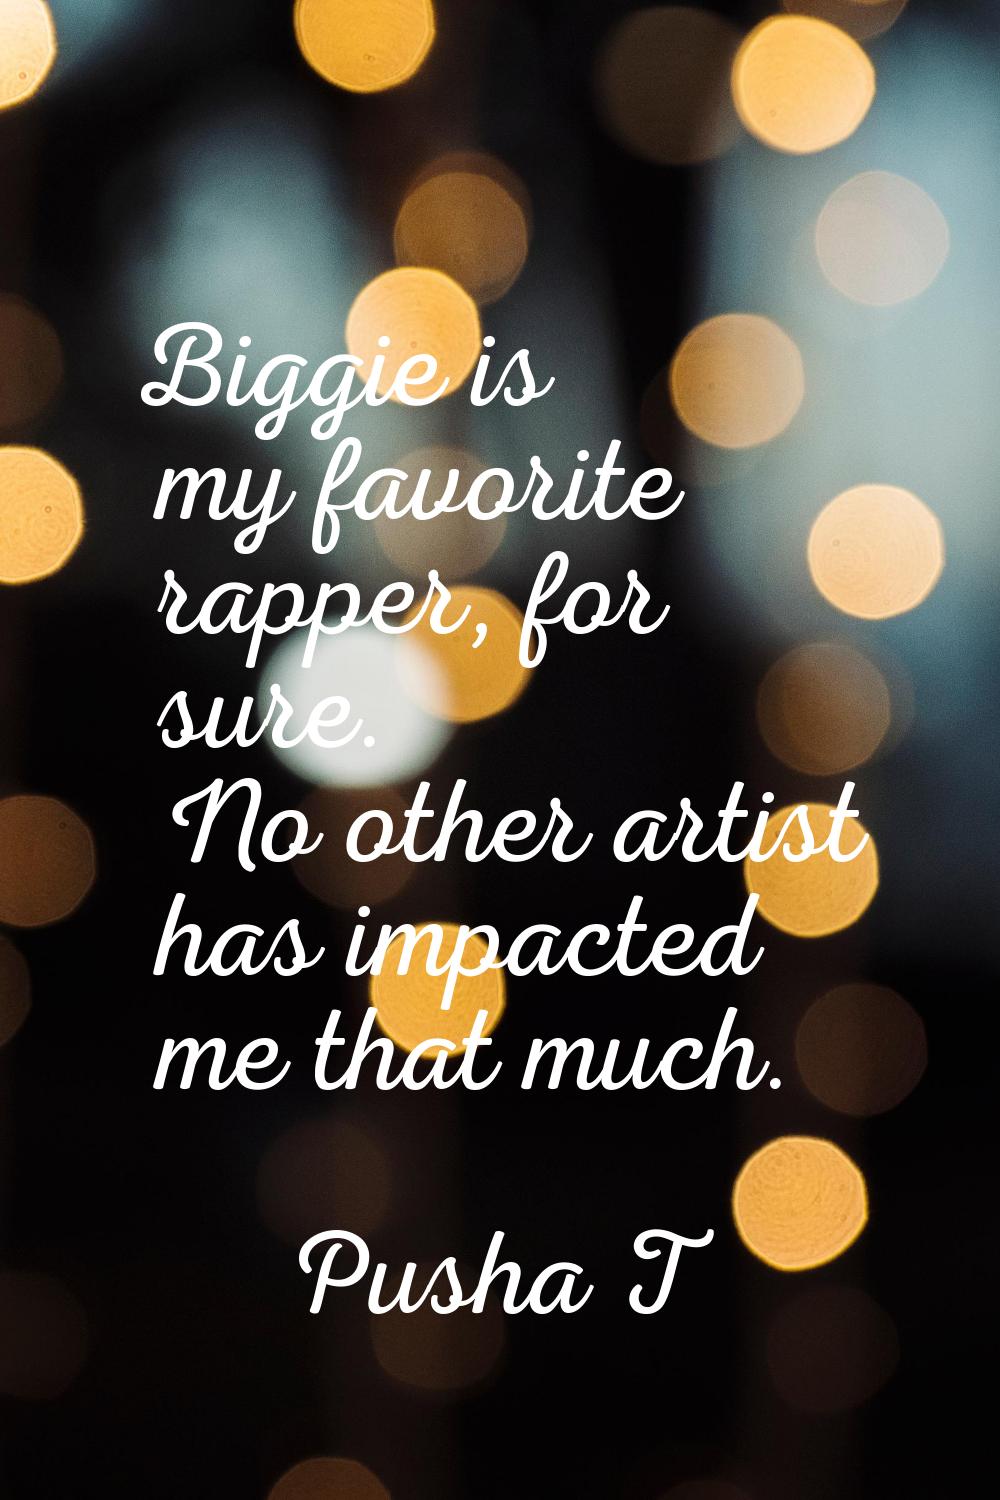 Biggie is my favorite rapper, for sure. No other artist has impacted me that much.